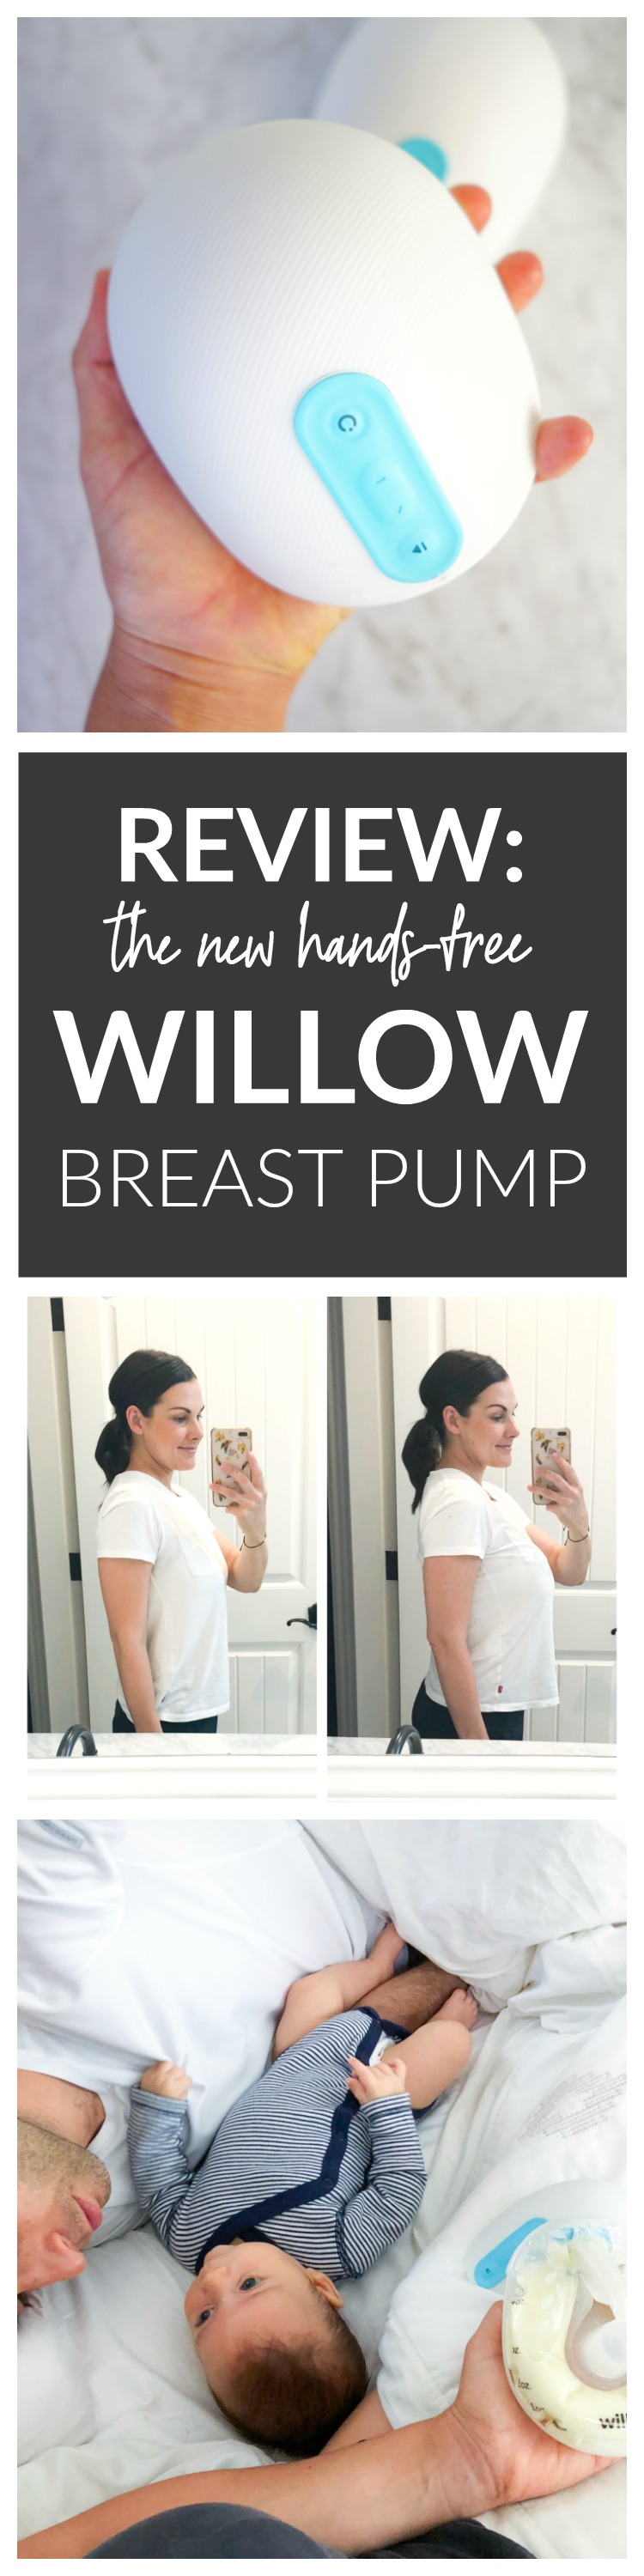 A review of the new hands-free Willow Breast Pump